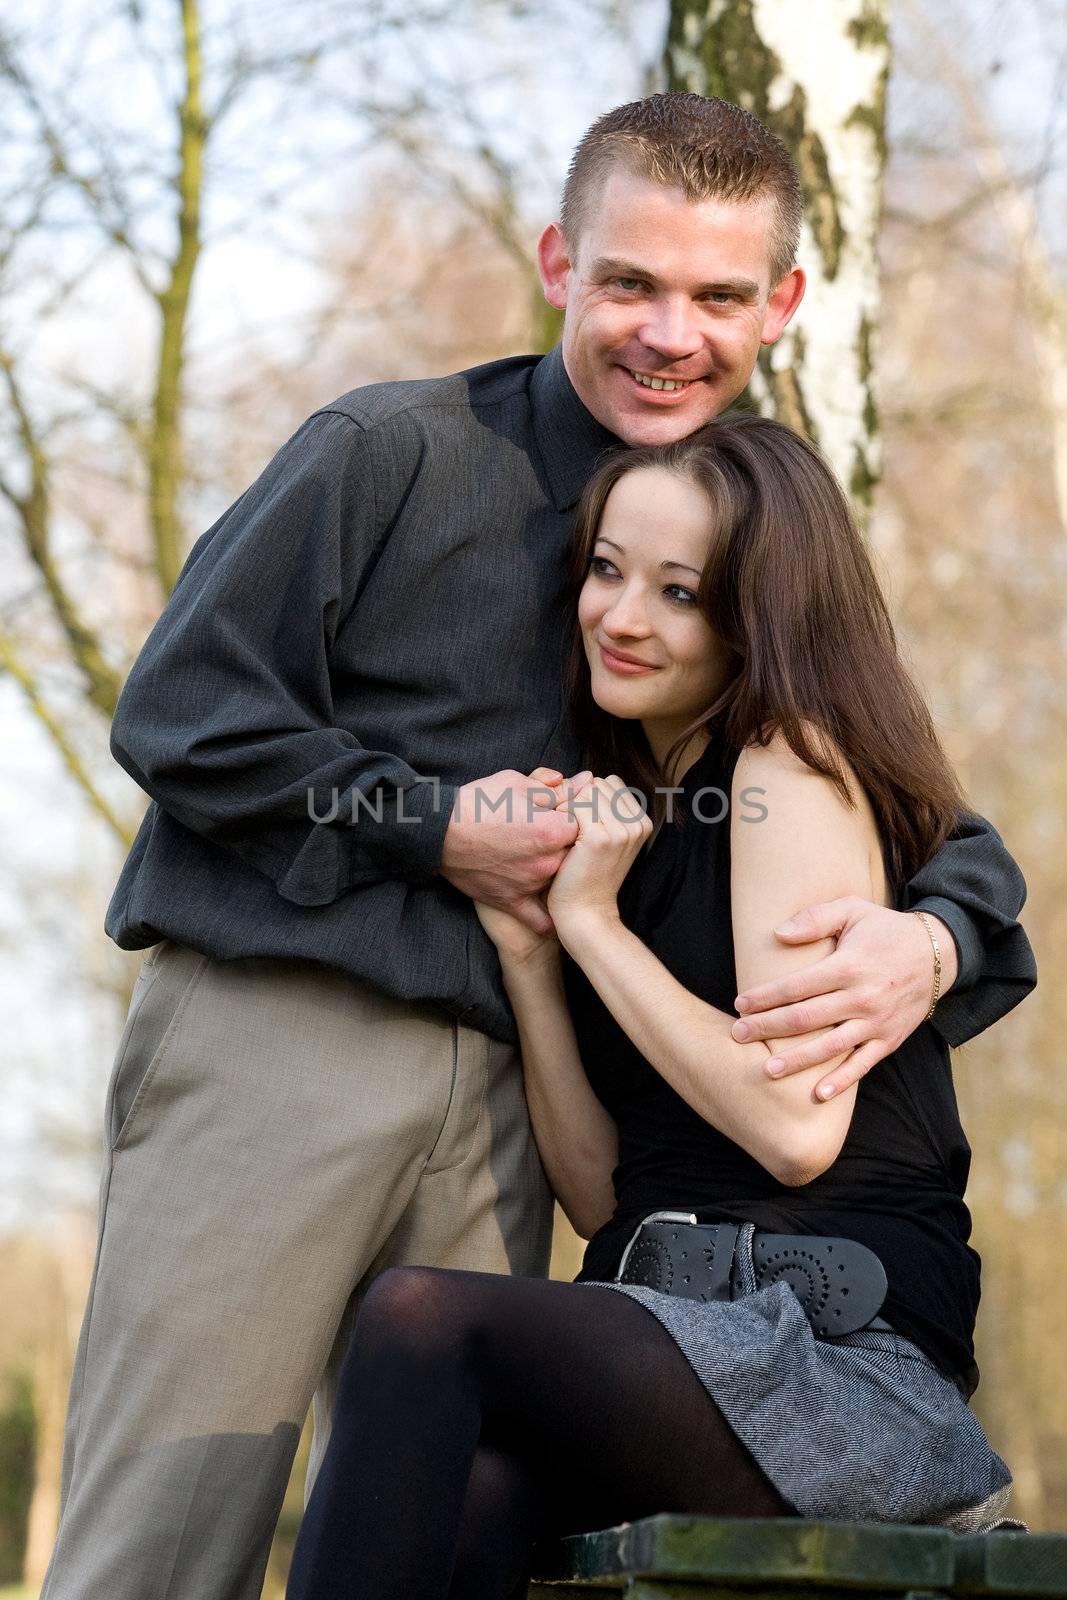 Man and girlfriend on a bench in a park caring